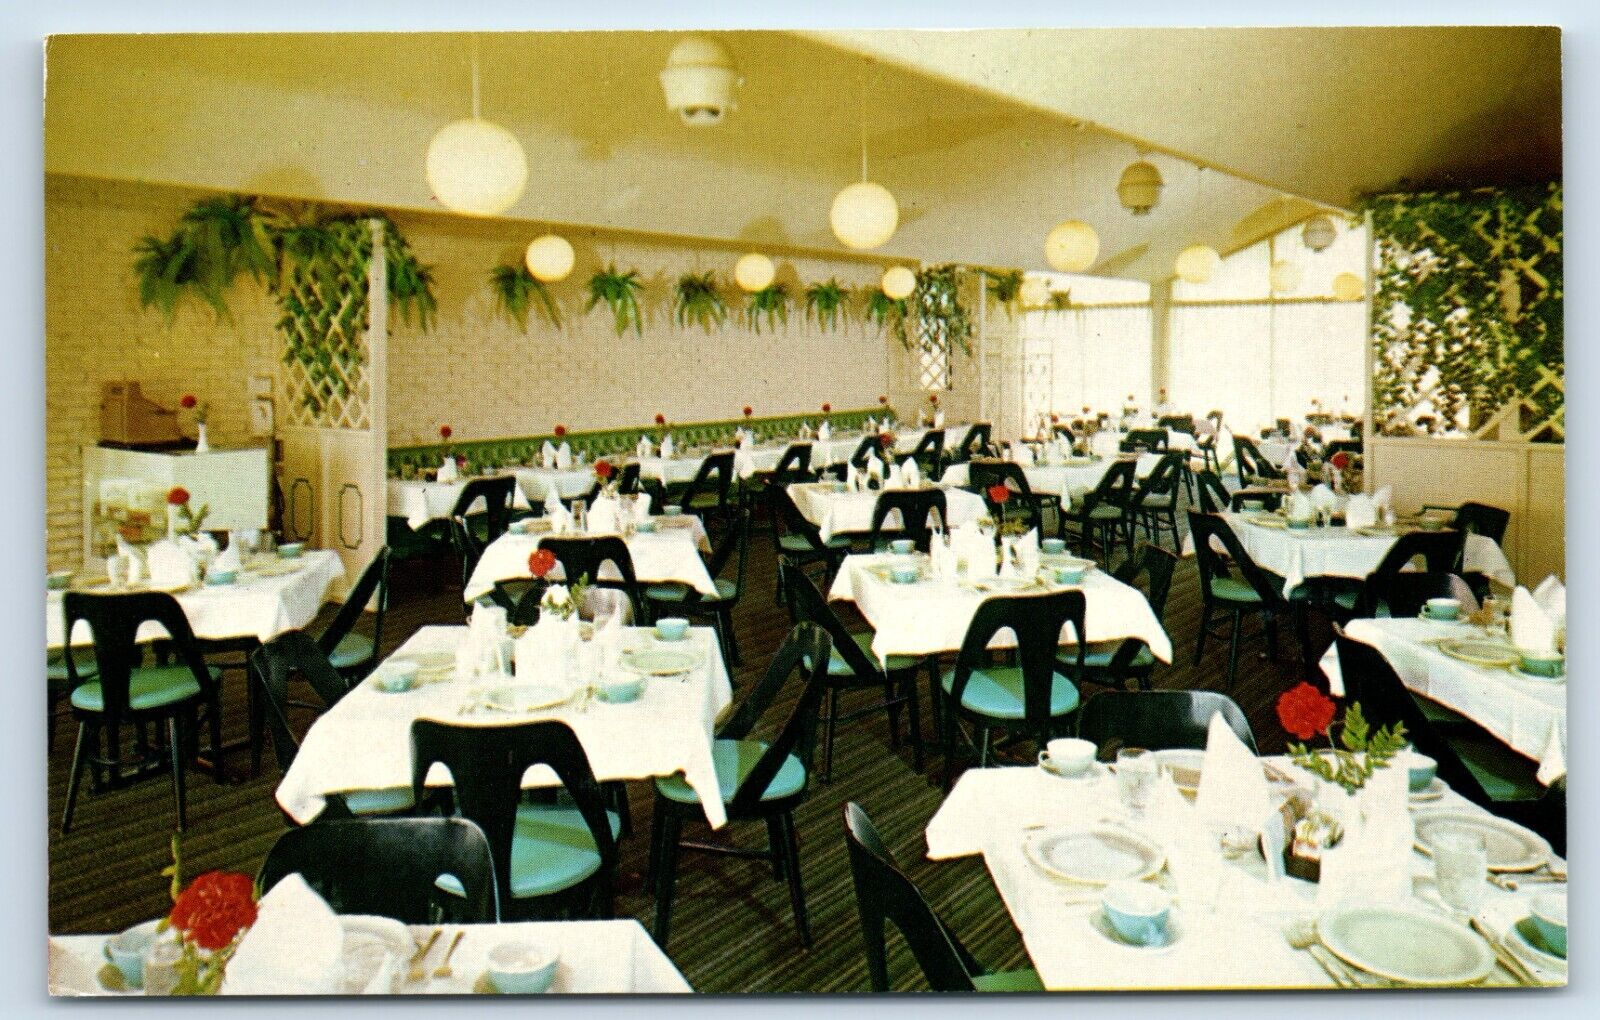 Postcard - Interior View Dining Room at the Holiday Inn Vincennes Indiana c1960s